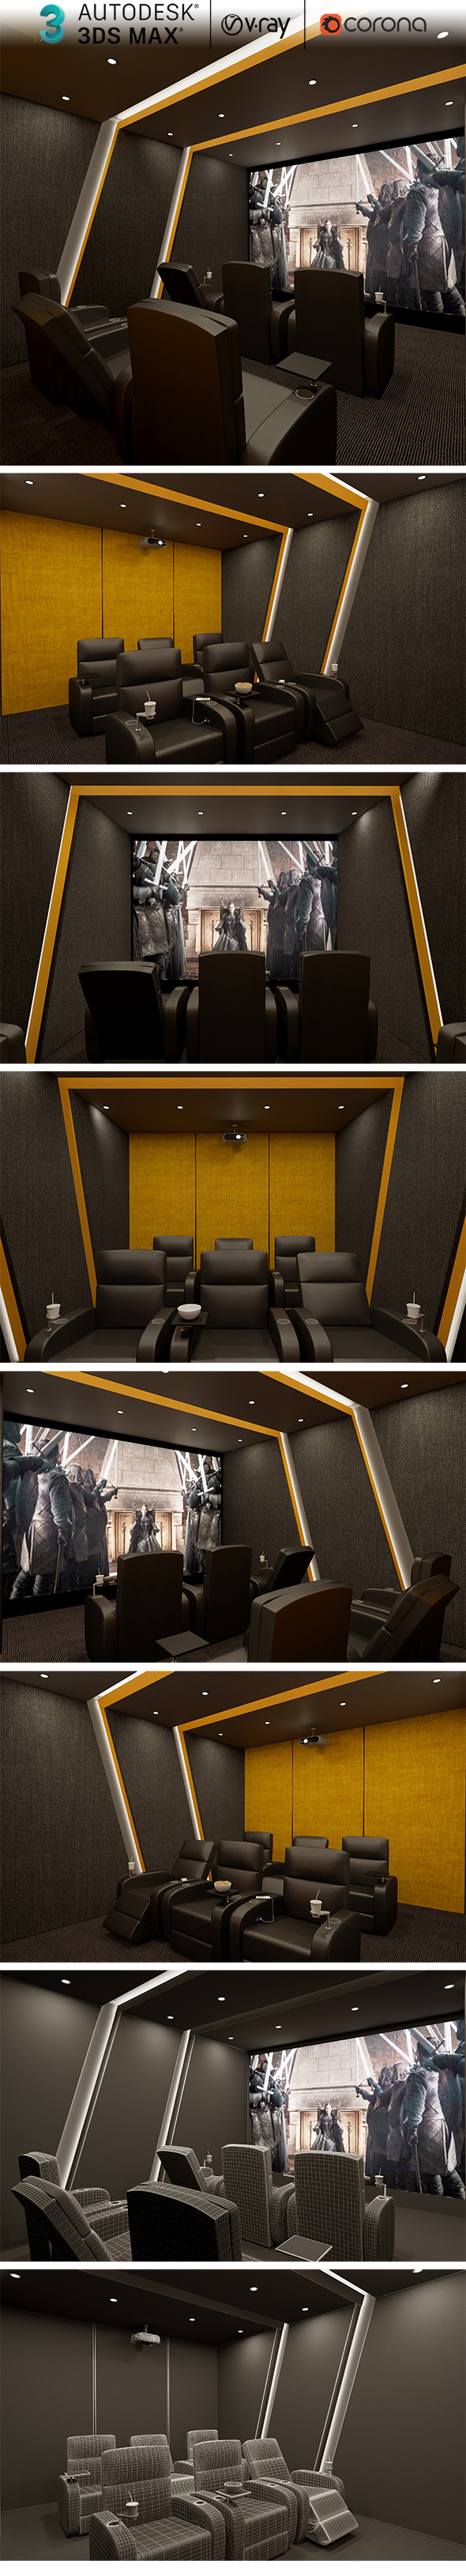 [DOWNLOAD]Home Cinema Design Collection 18